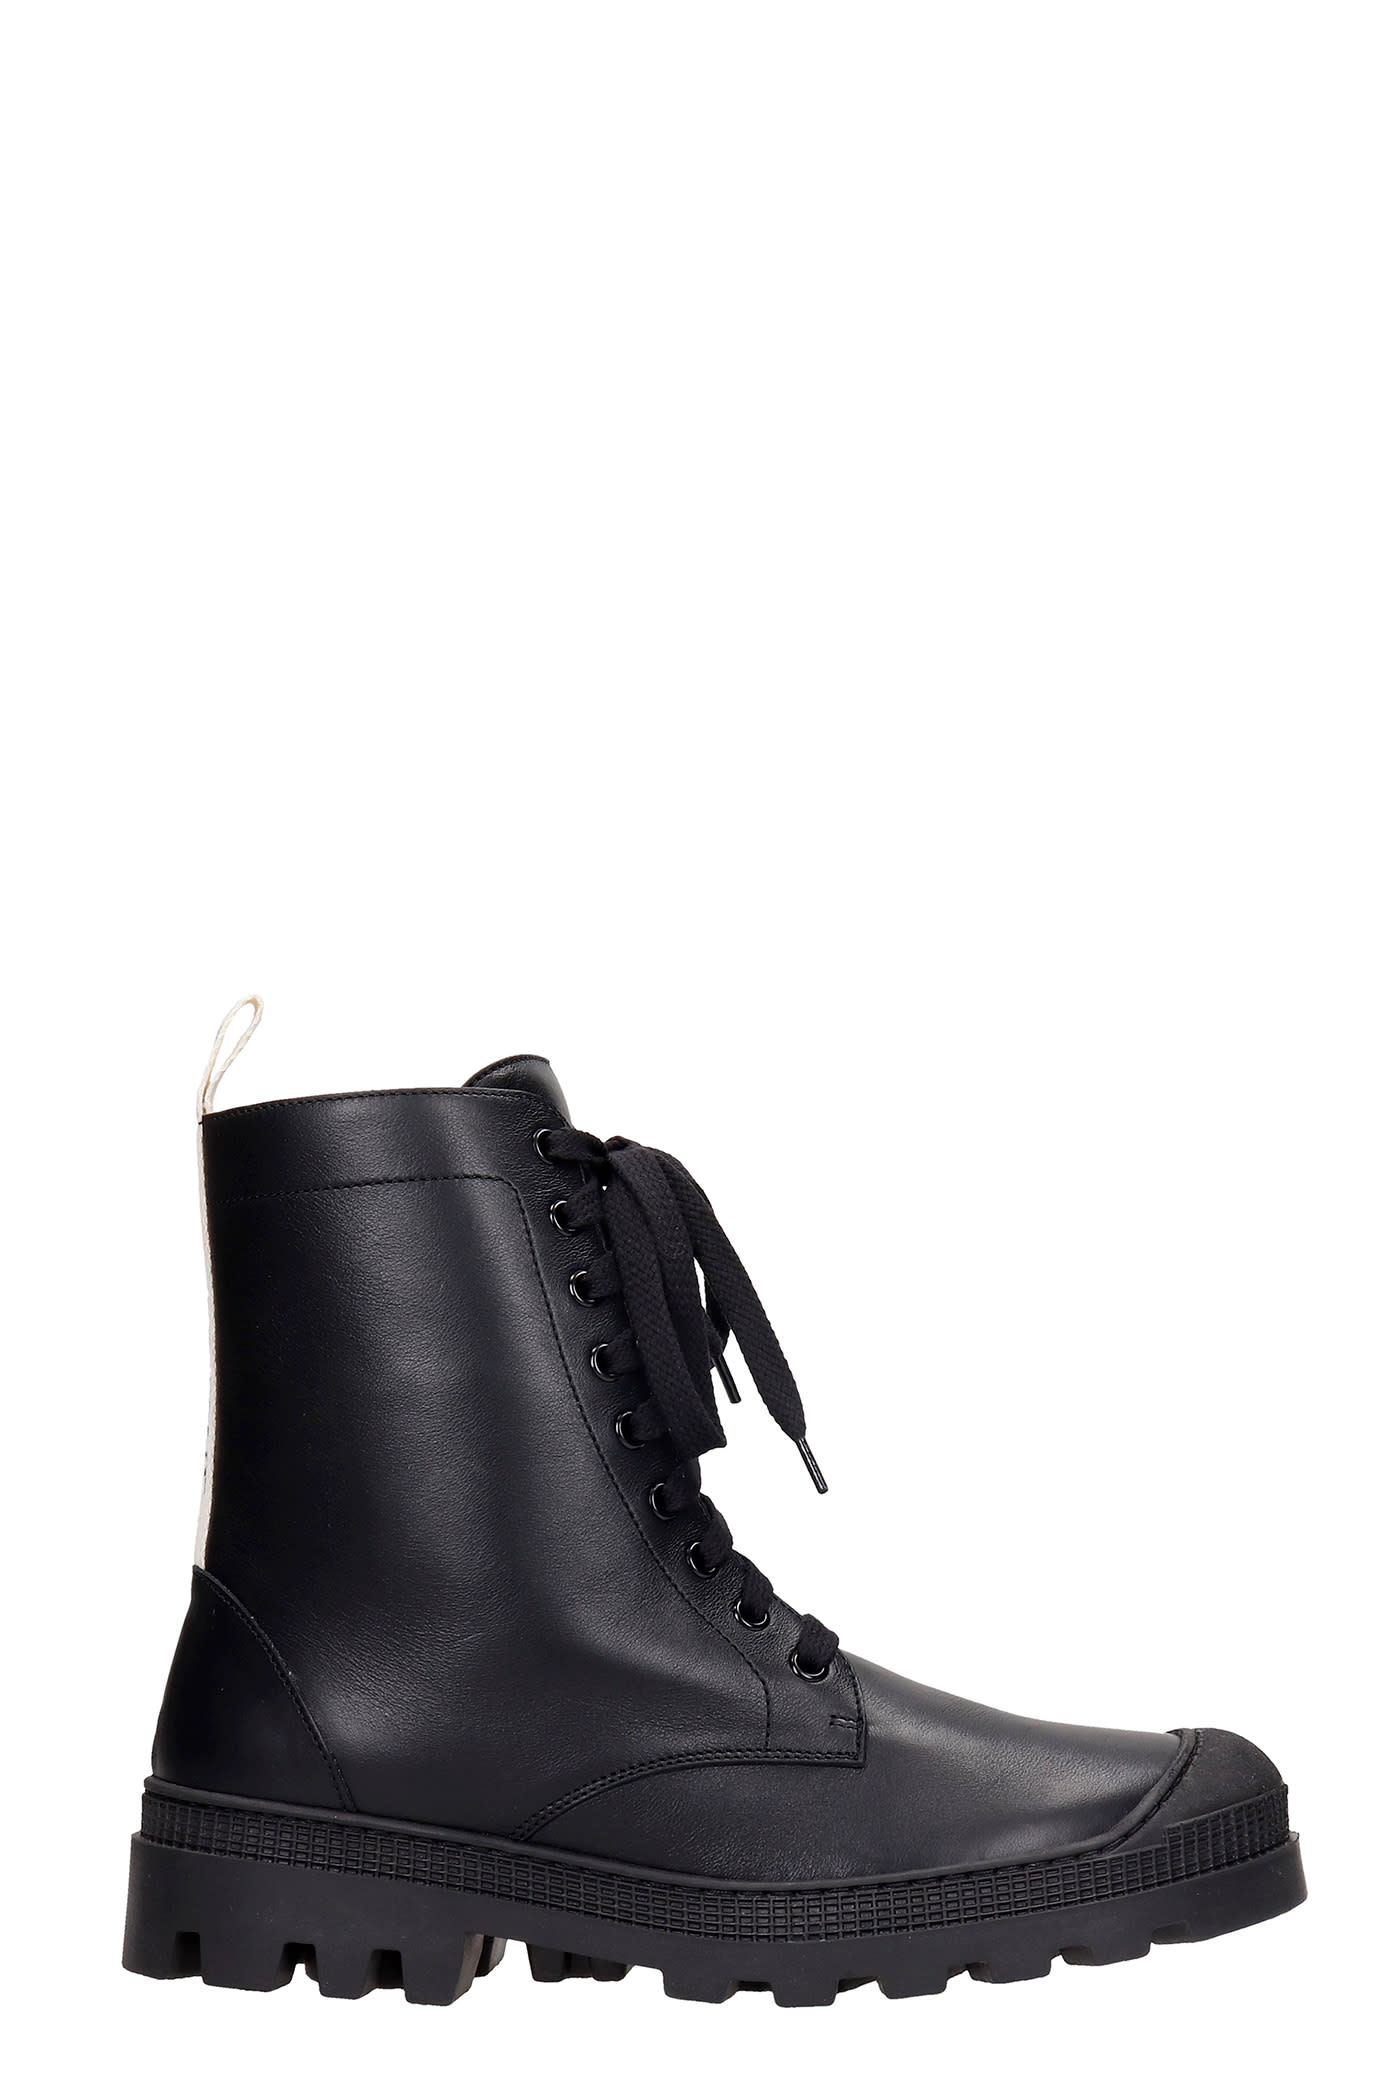 LOEWE COMBAT BOOTS IN BLACK LEATHER,M816285X071100